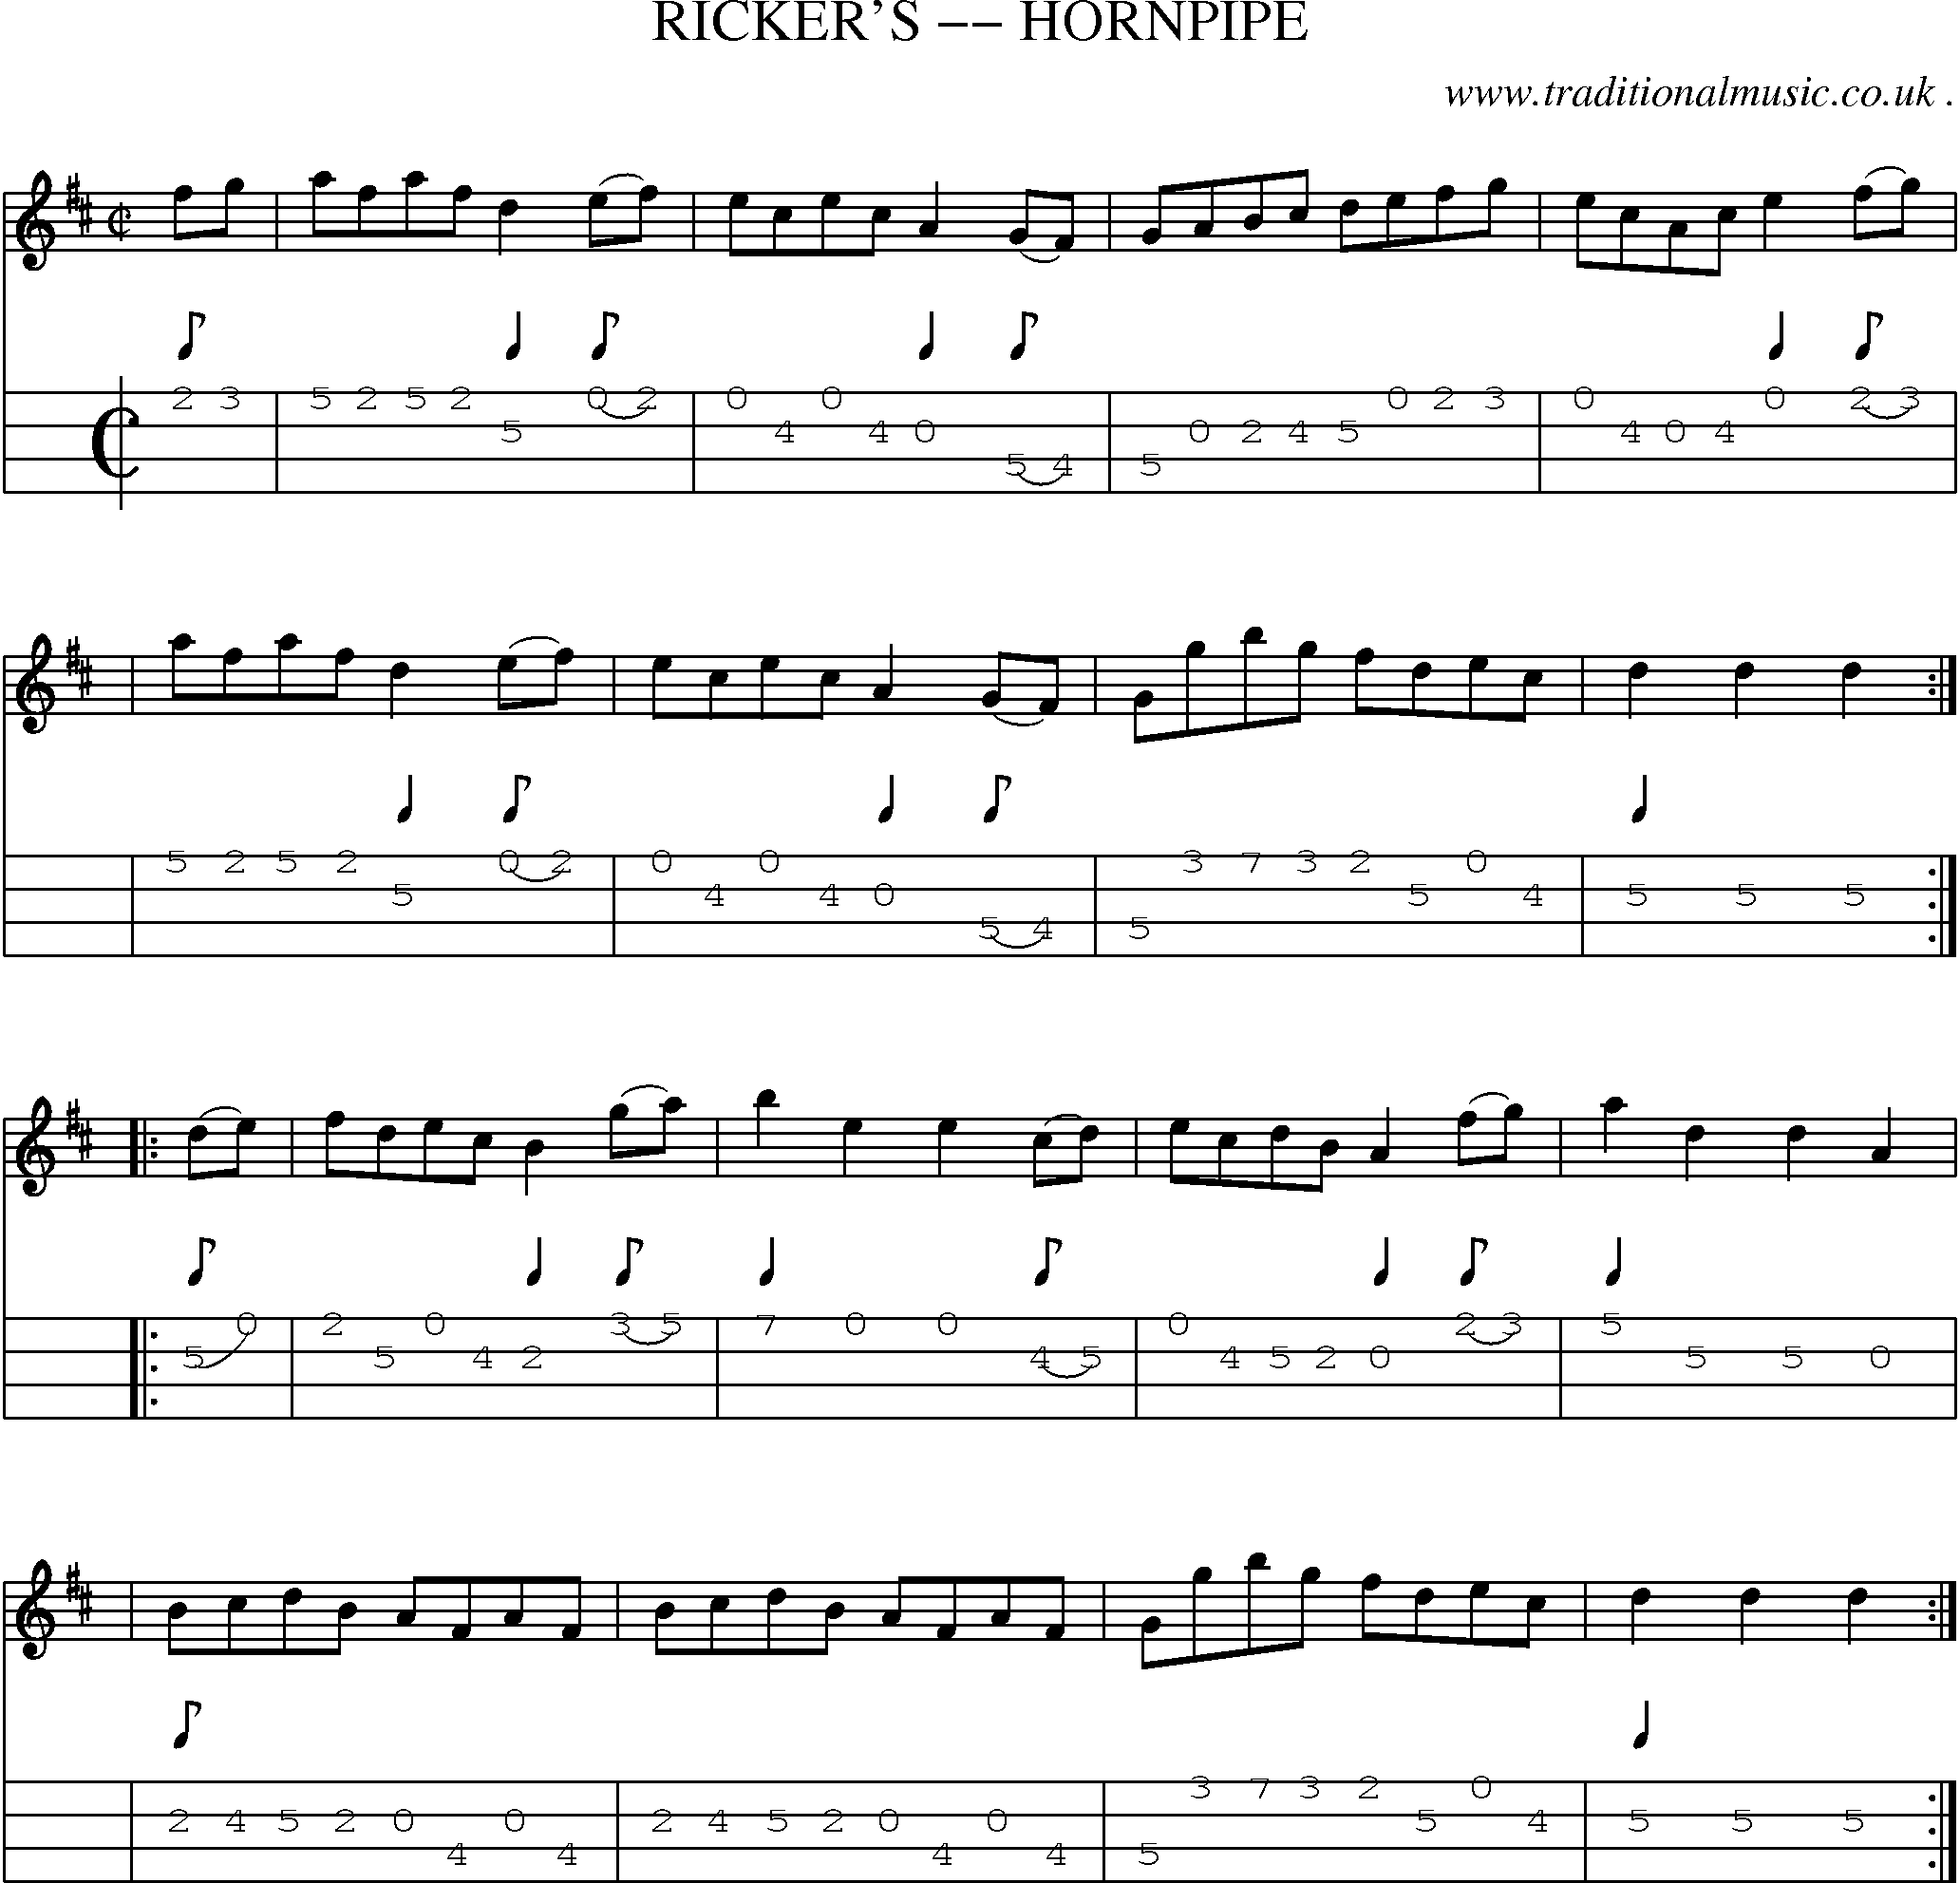 Music Score and Guitar Tabs for Rickers Hornpipe